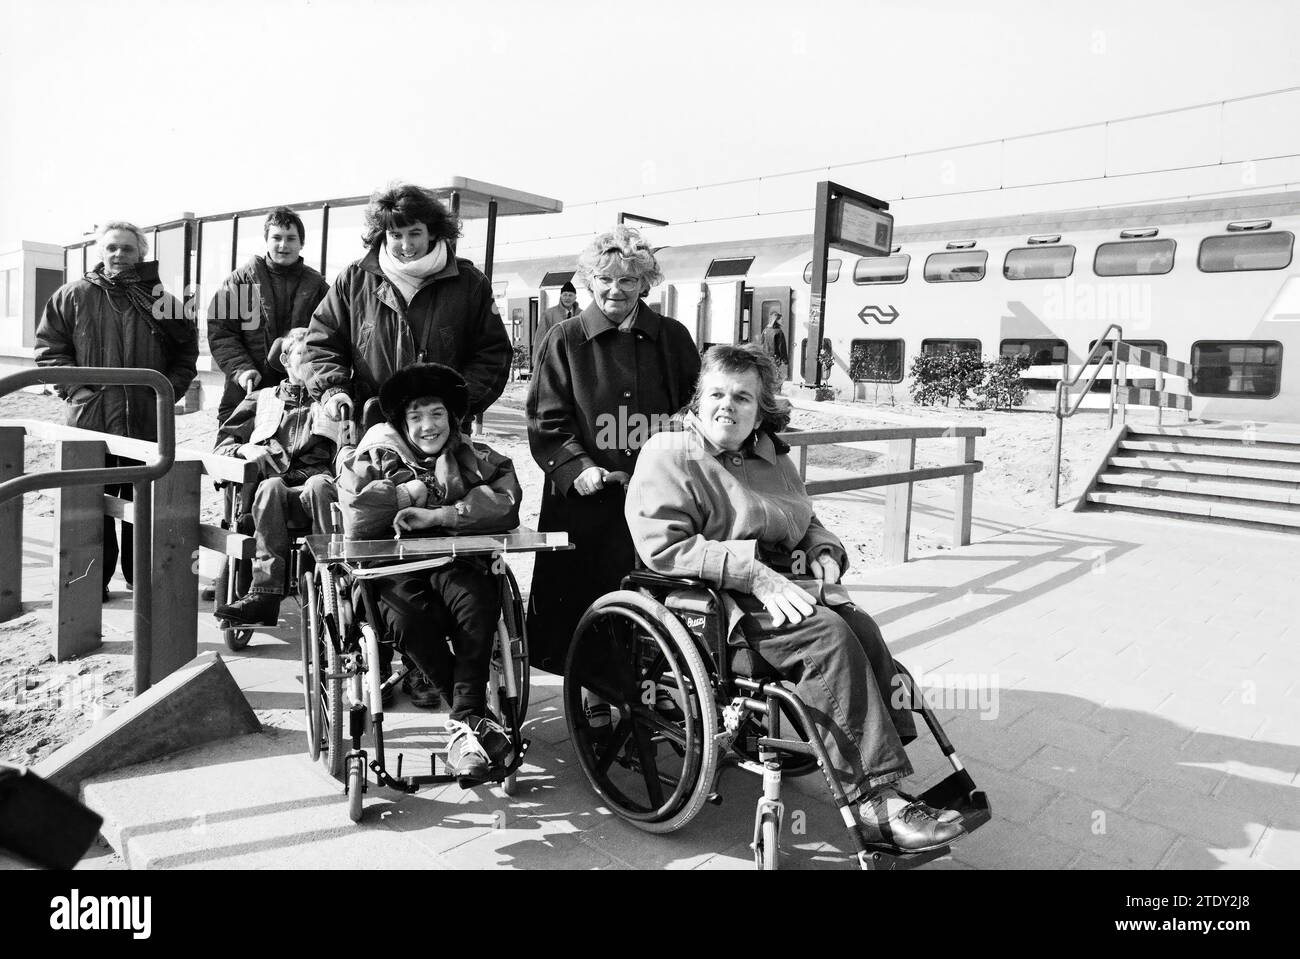 Disabled people by train, H'dorp, Hoofddorp, The Netherlands, 08-03-1996, Whizgle News from the Past, Tailored for the Future. Explore historical narratives, Dutch The Netherlands agency image with a modern perspective, bridging the gap between yesterday's events and tomorrow's insights. A timeless journey shaping the stories that shape our future. Stock Photo